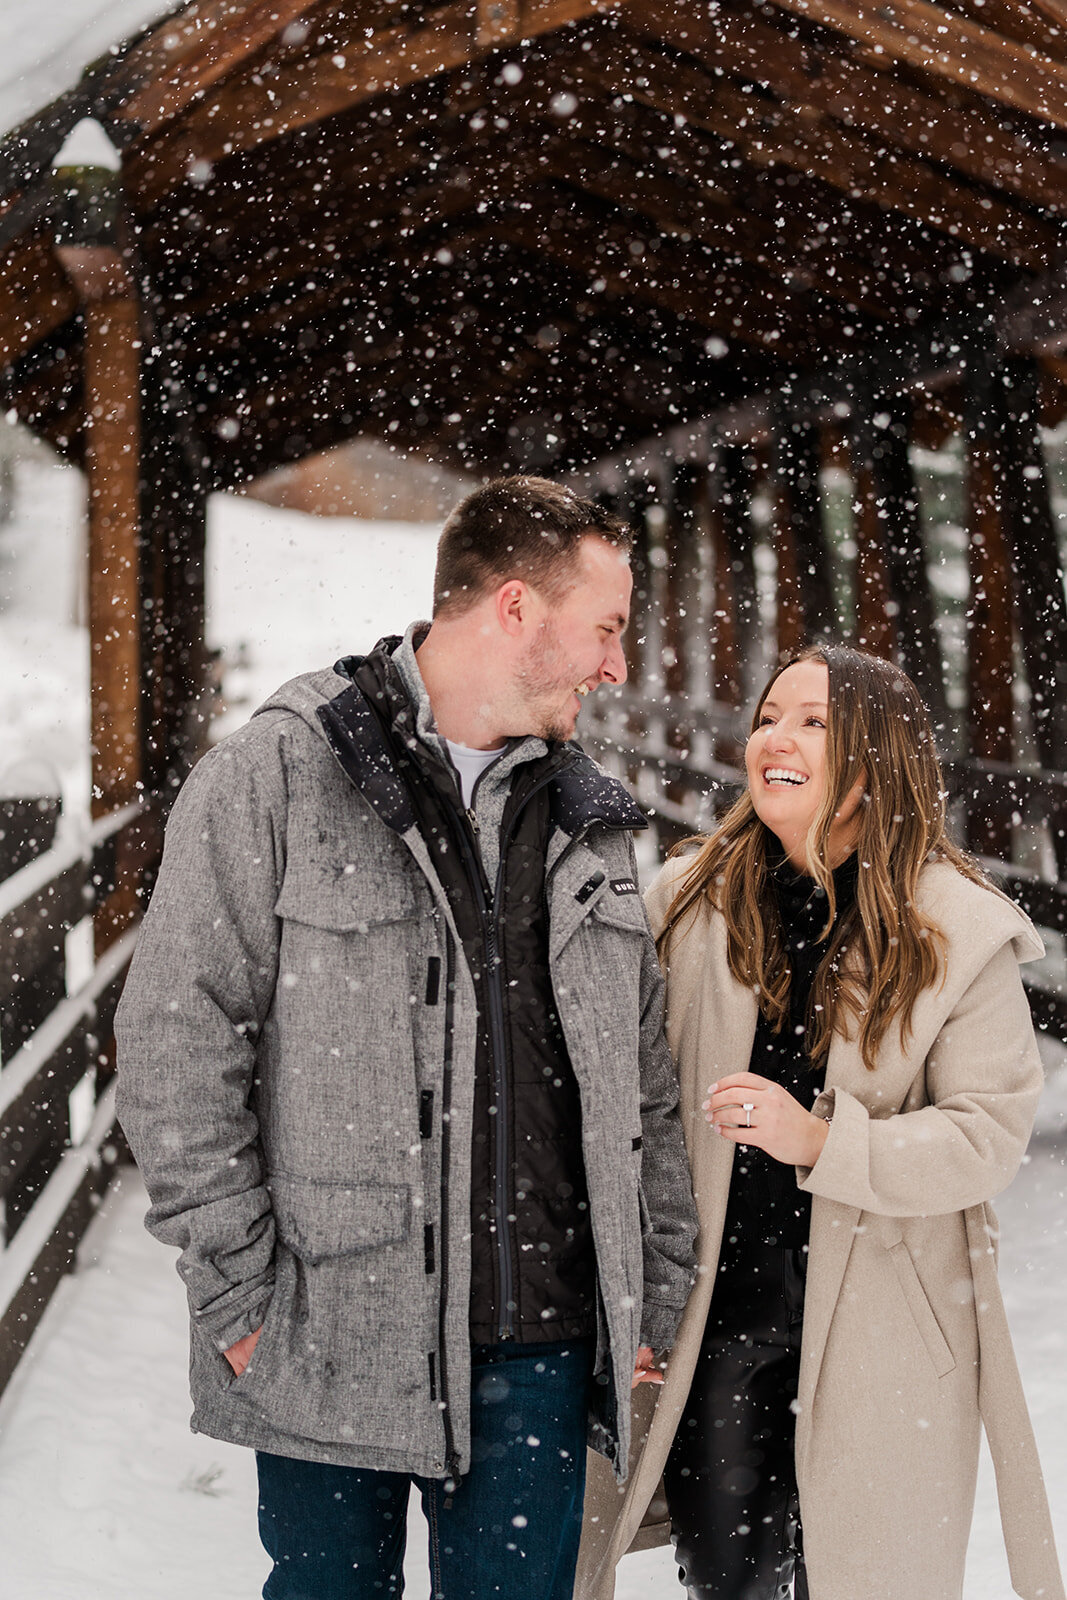 This "just because" photo session in the great outdoors perfectly captures the playful and carefree love of this adventurous Colorado couple.